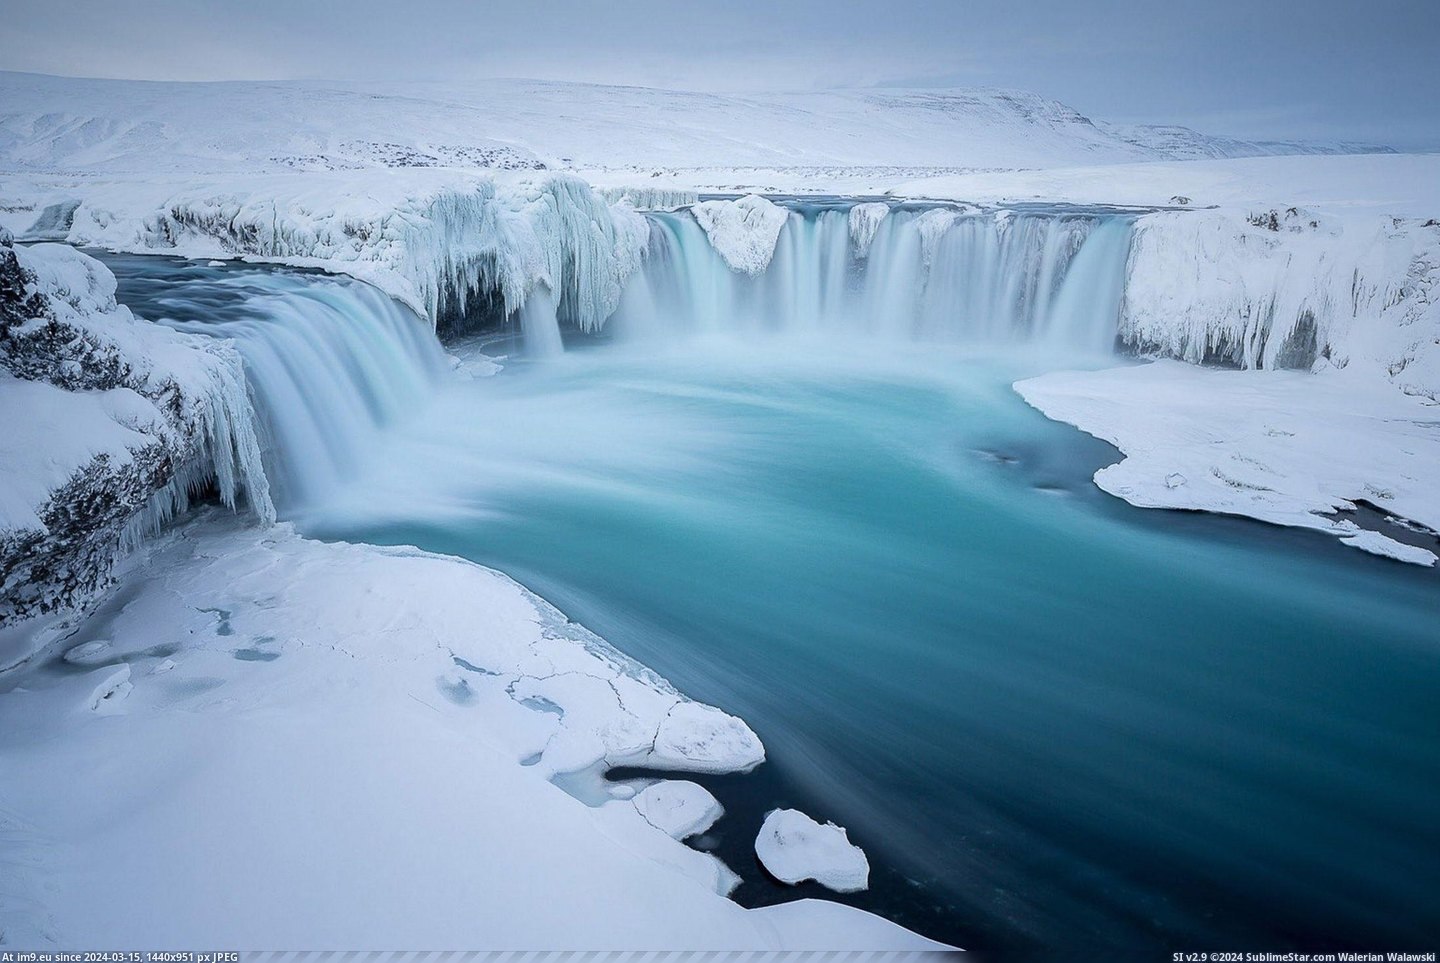 #Wallpaper #Beautiful #Wide #Gods #Afoss #Holko #Iceland #Waterfall #Joshua [Earthporn] 'Waterfall of the Gods': Goðafoss, Iceland [1297x1463] by Joshua Holko Pic. (Image of album My r/EARTHPORN favs))